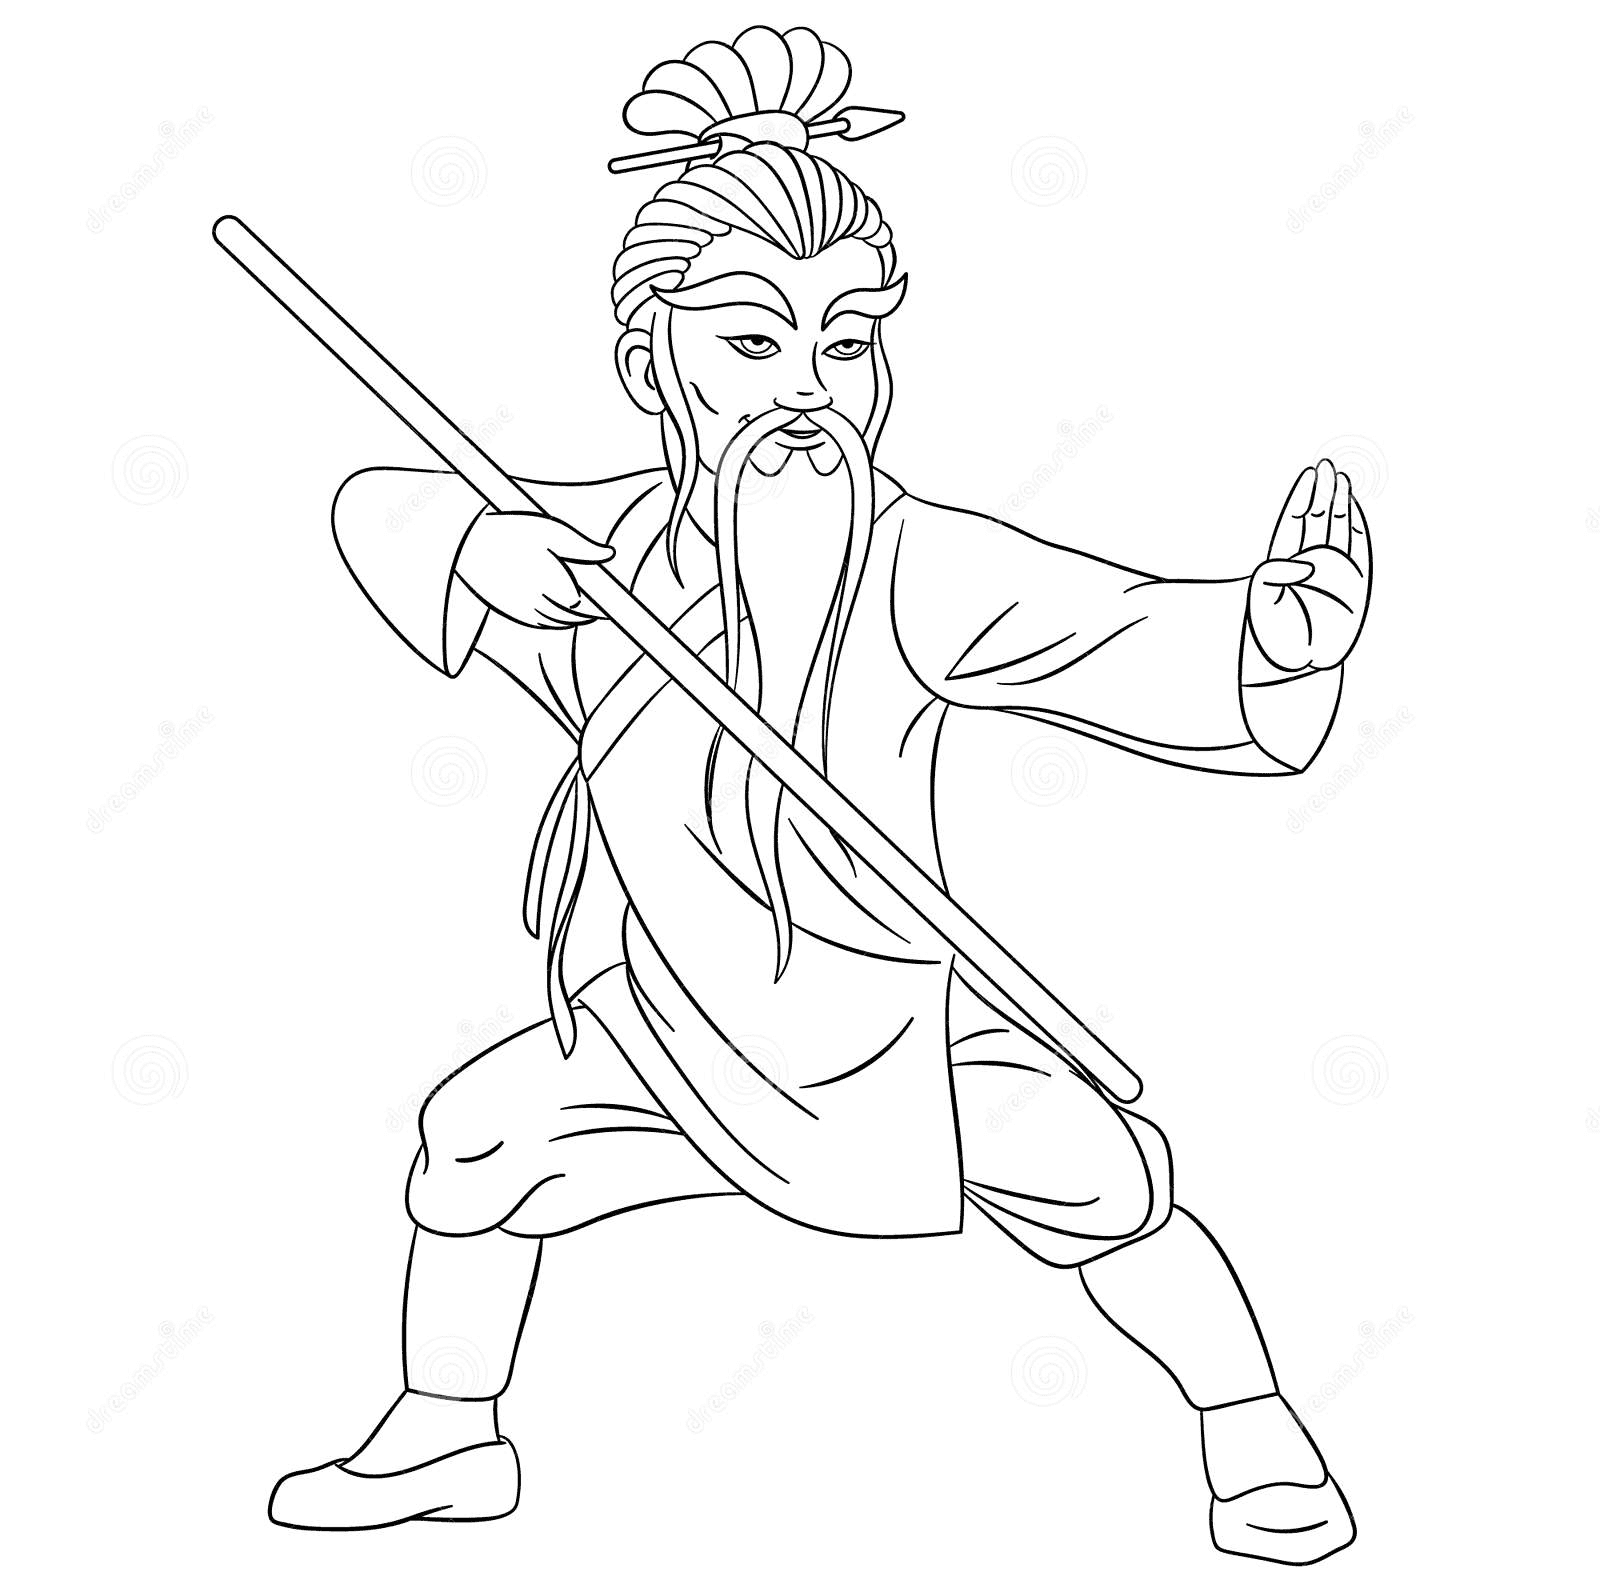 Coloring Page With Shaolin Monk Fighting